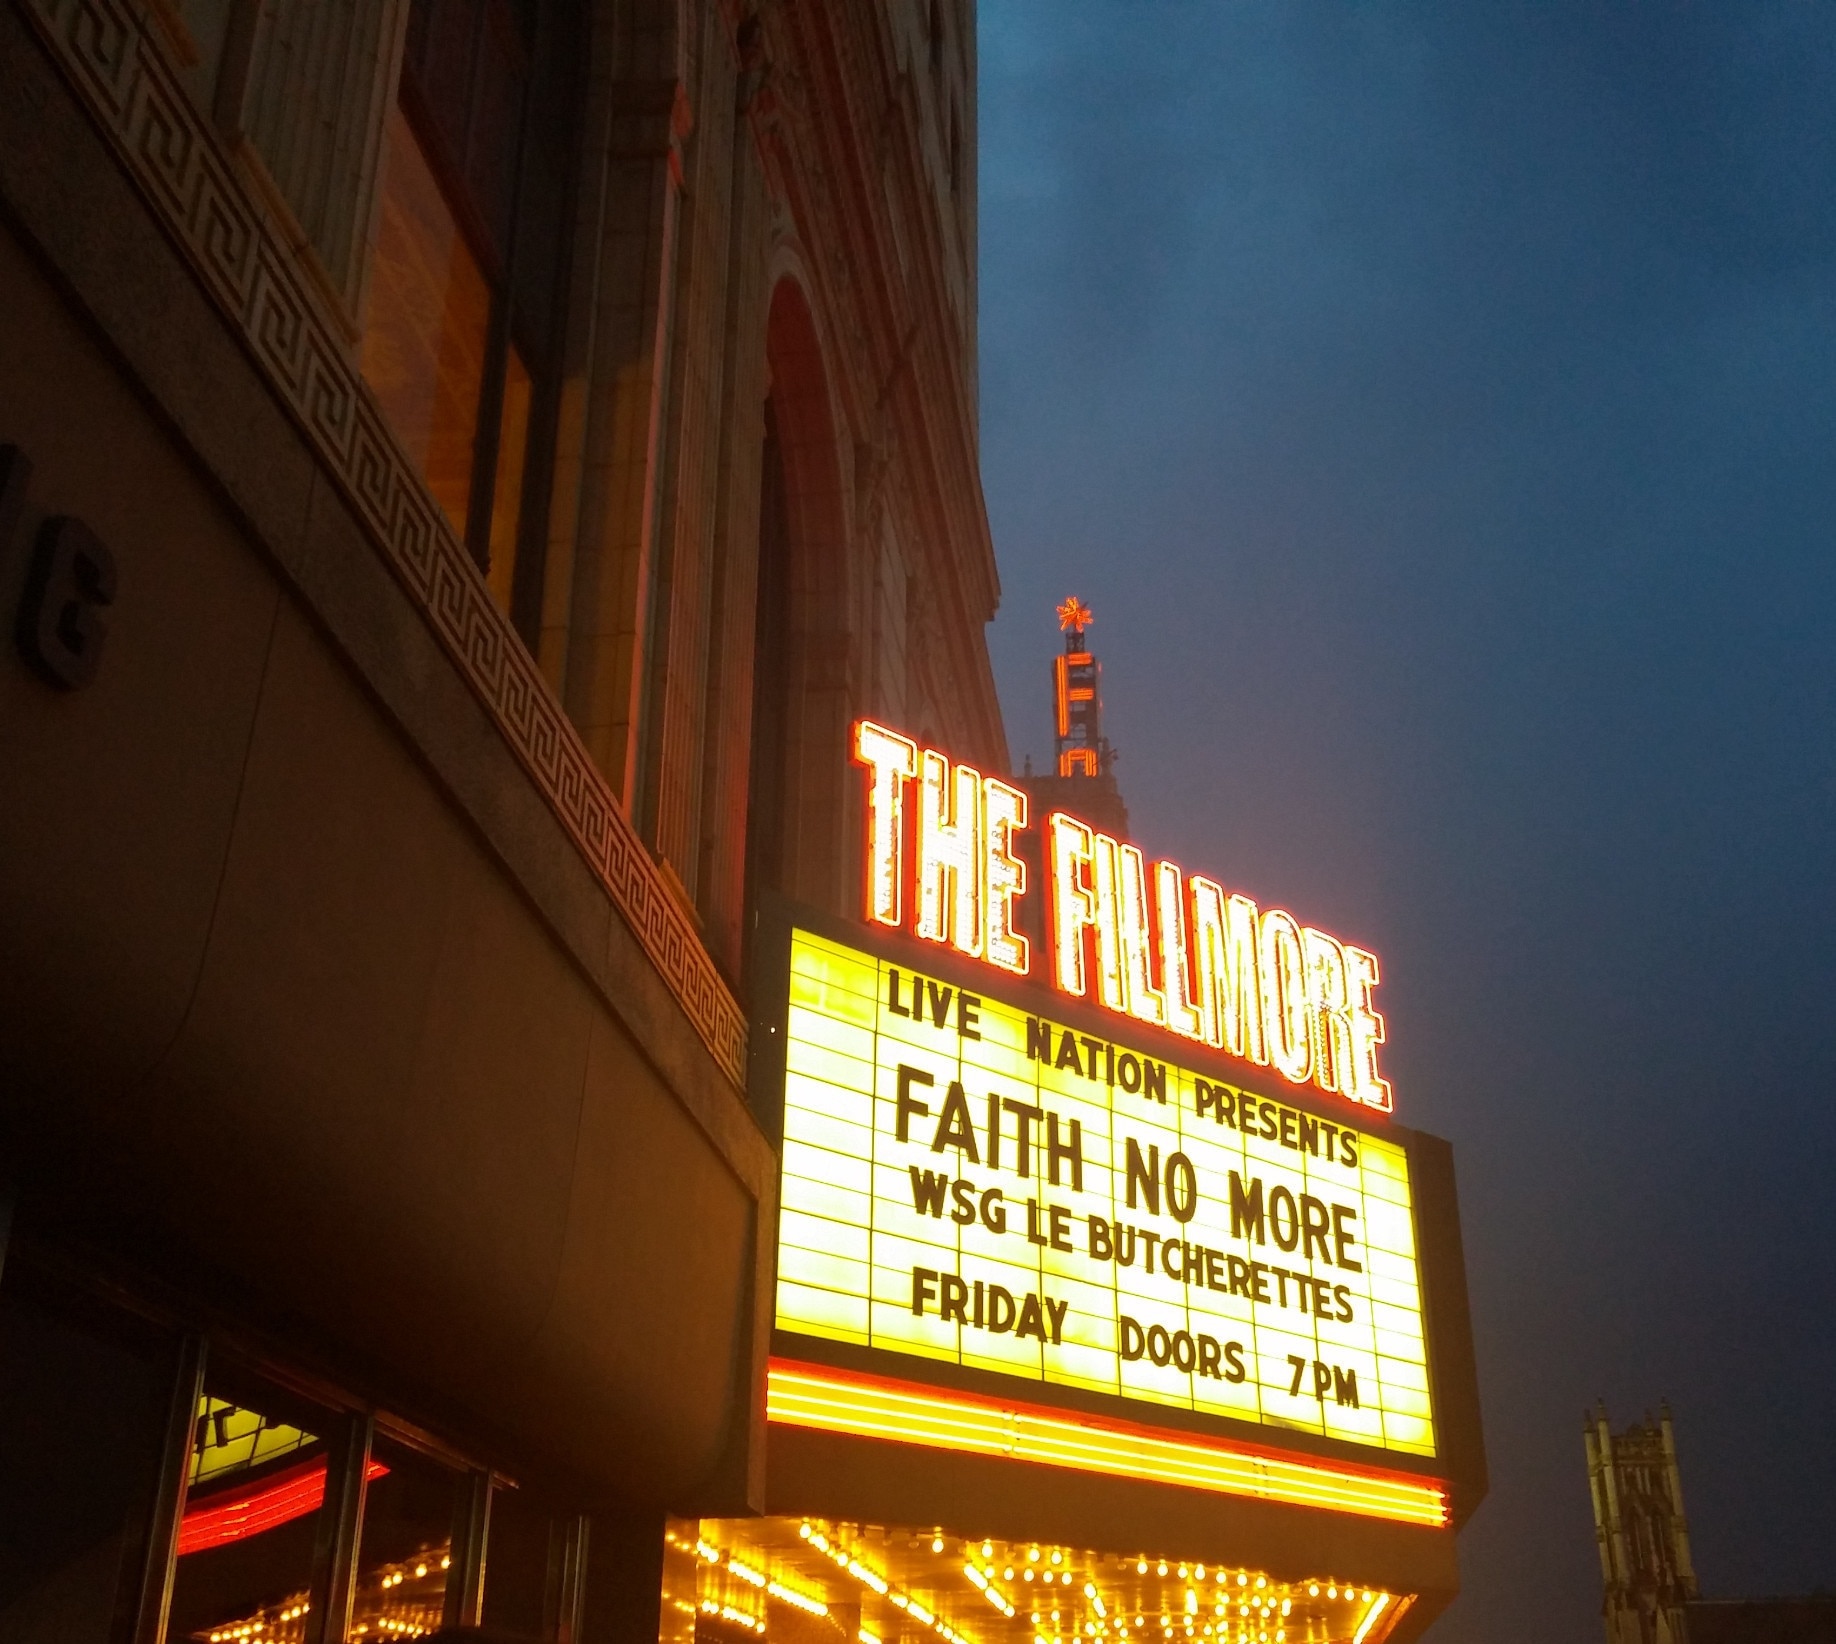 Opened in 1925  and known for most of its existence as the State Theatre, the recently rebranded Fillmore Detroit is a nearly 3000 seat concert venue.

The towering marquee of the neighboring Fox Theatre can be seen photo-bombing in the backdrop.